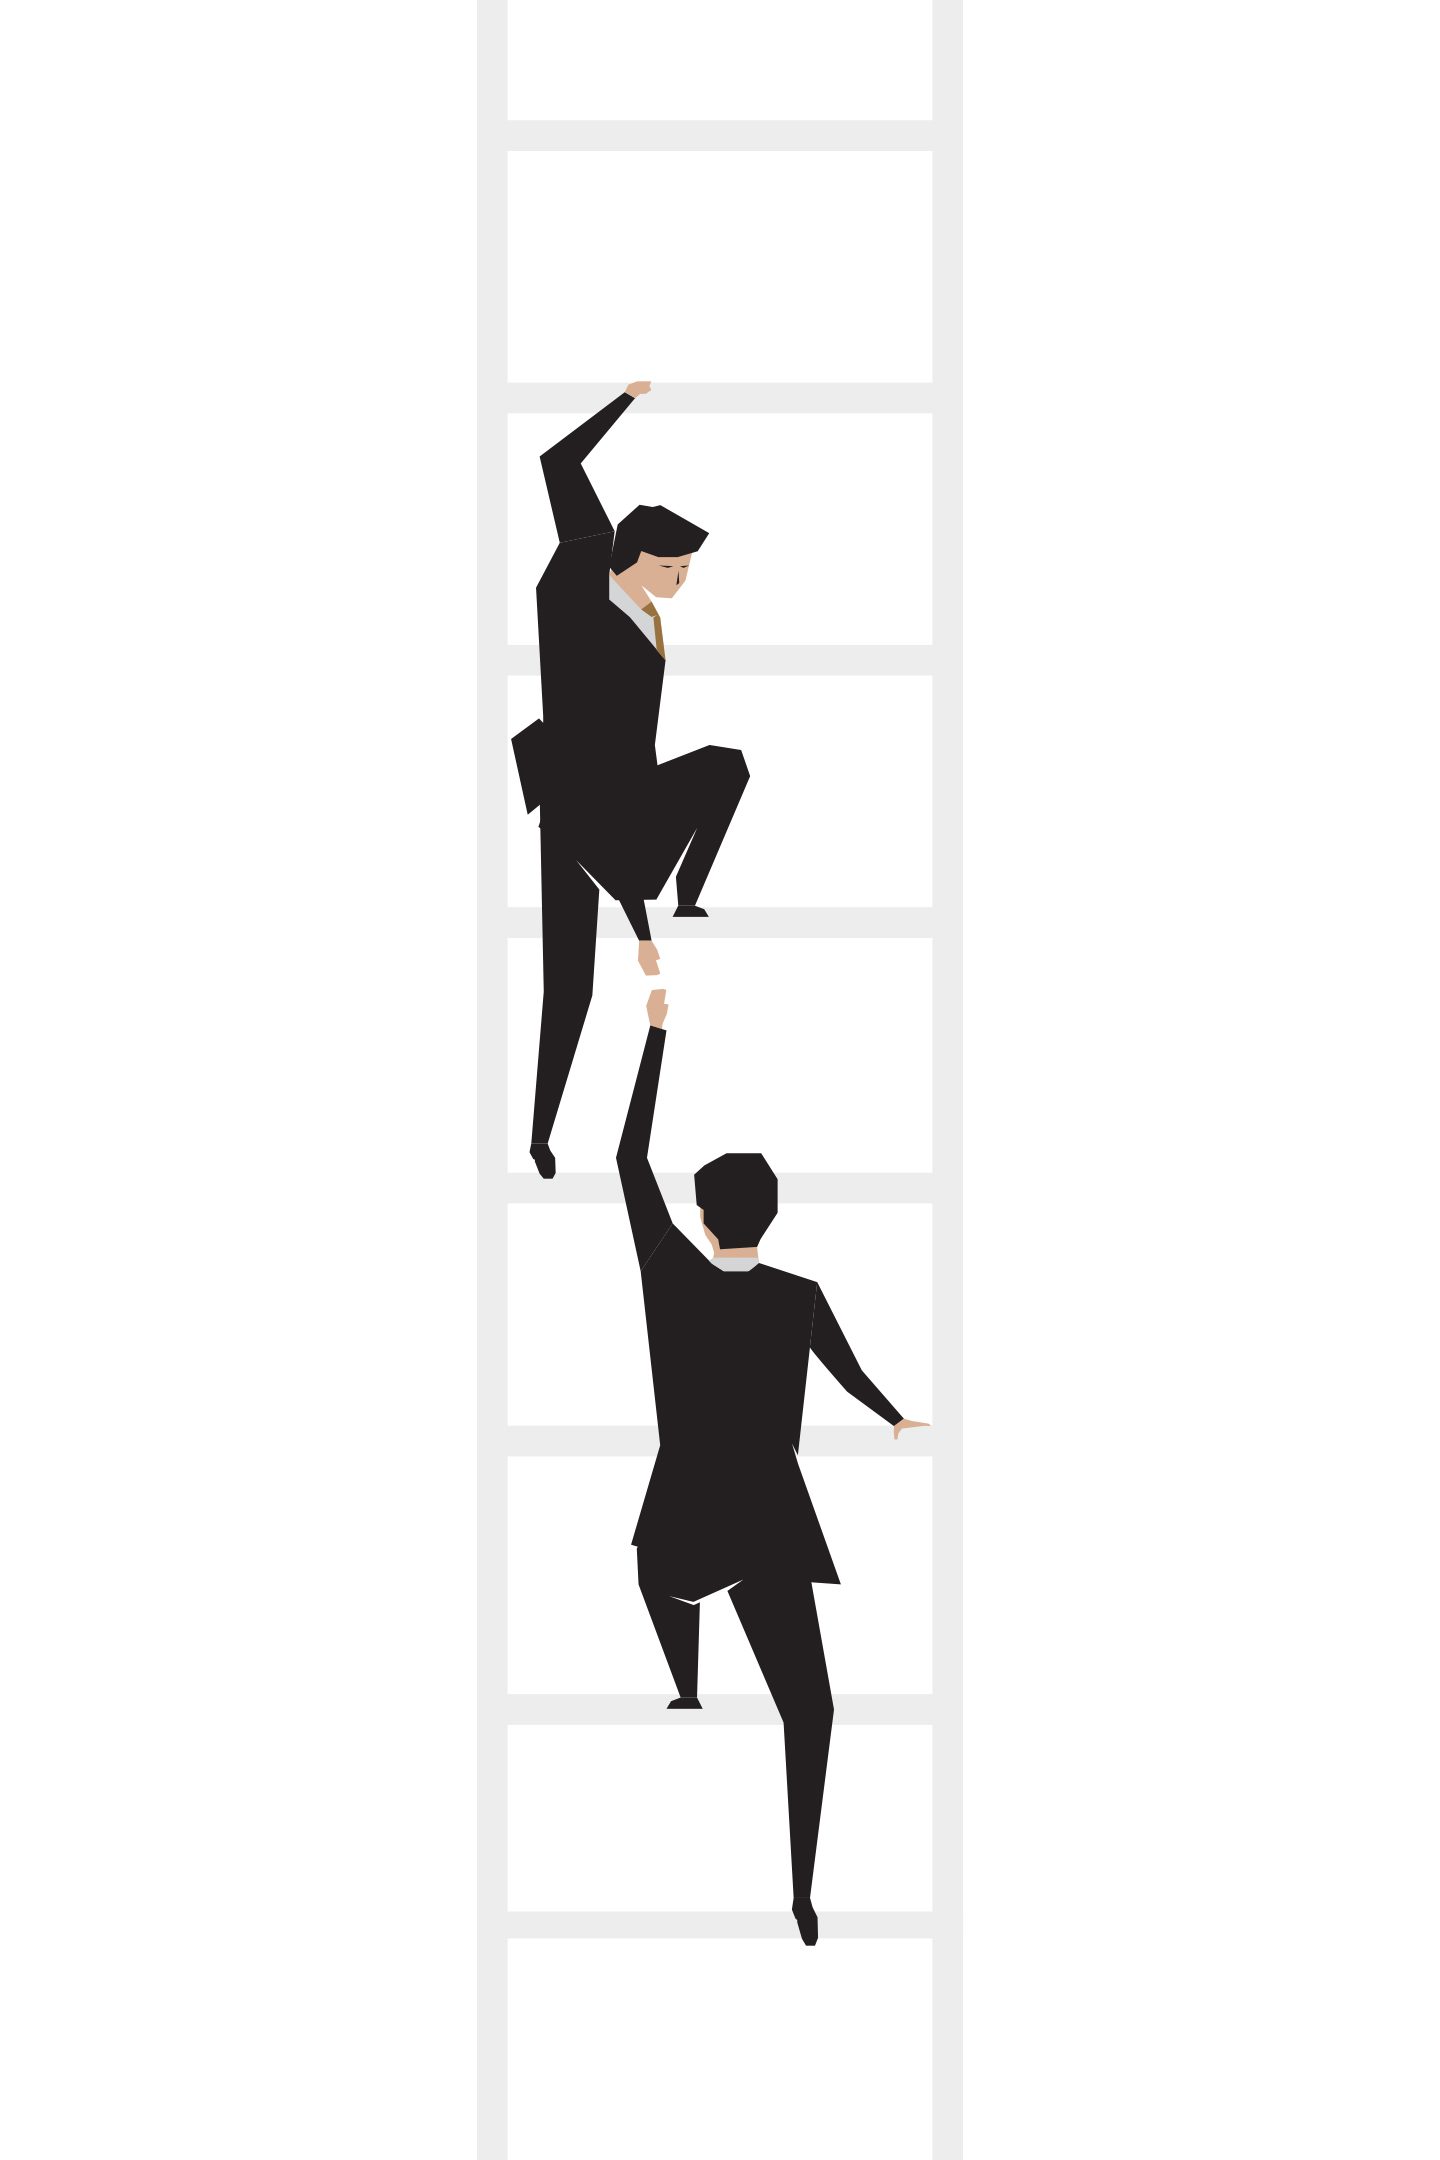 illustration of a man in a suit helping his employee climb a ladder